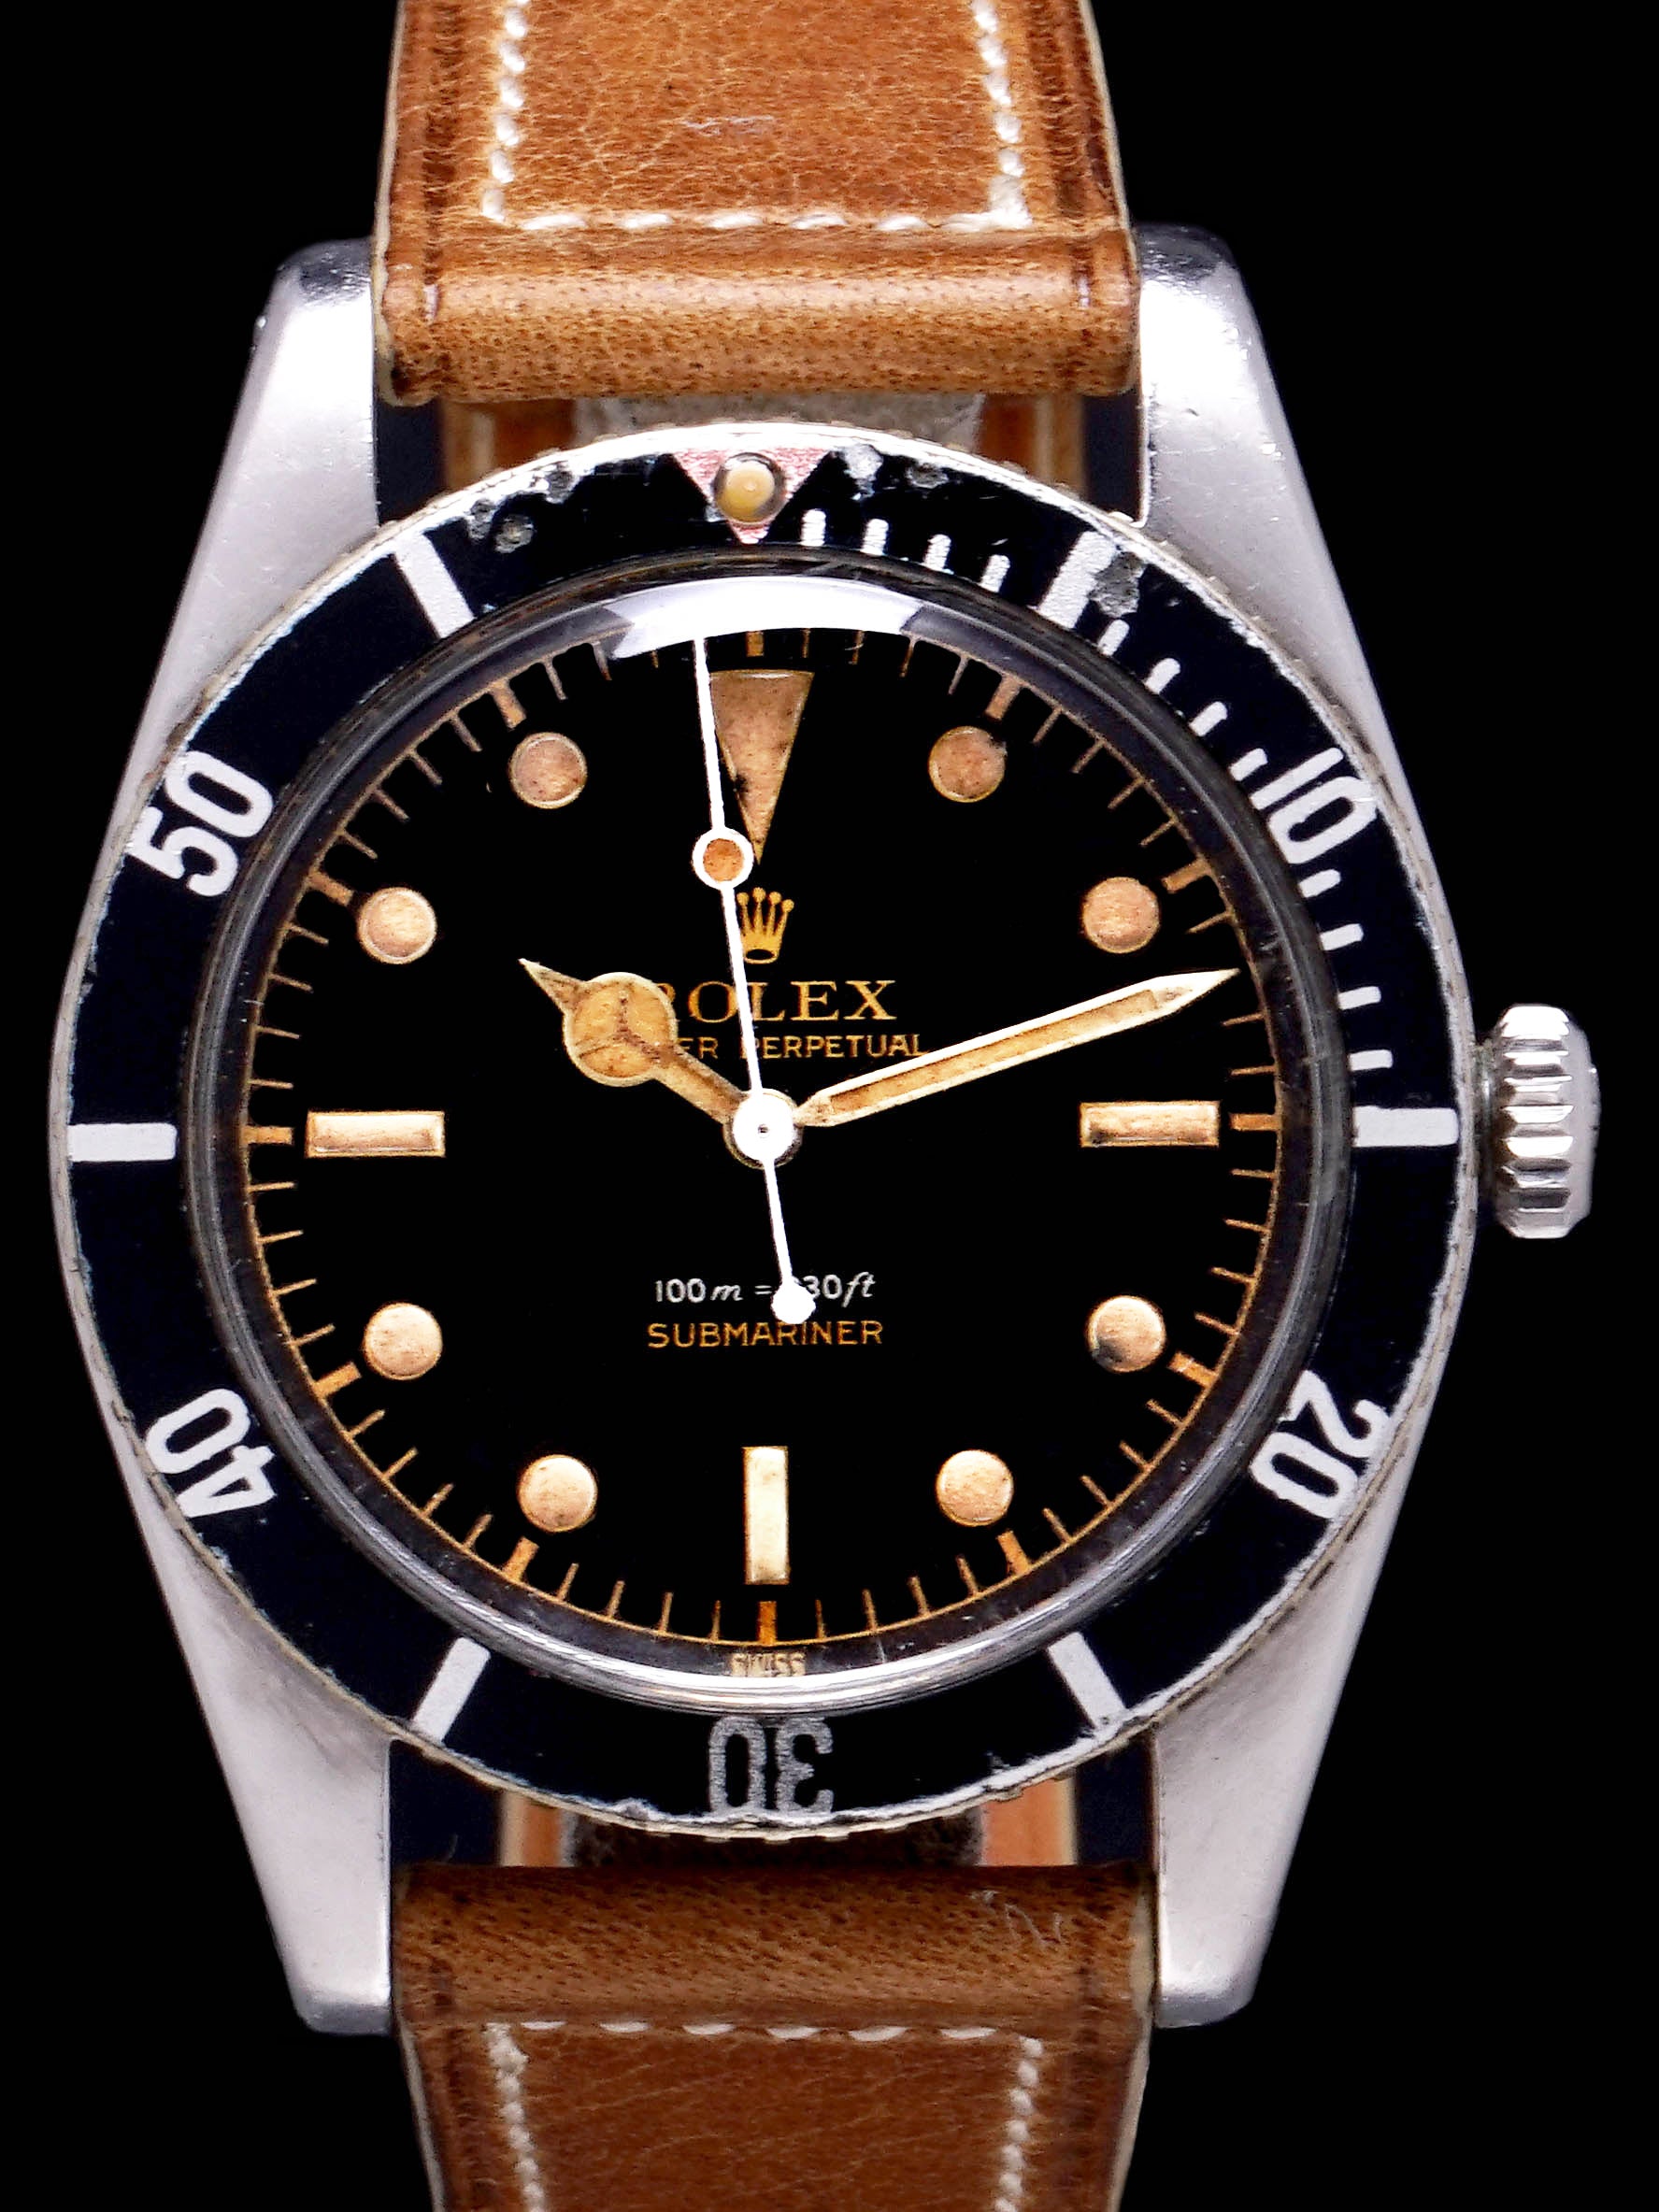 Canberra strubehoved Manners 1958 Rolex Submariner (Ref. 5508) "Small Crown"